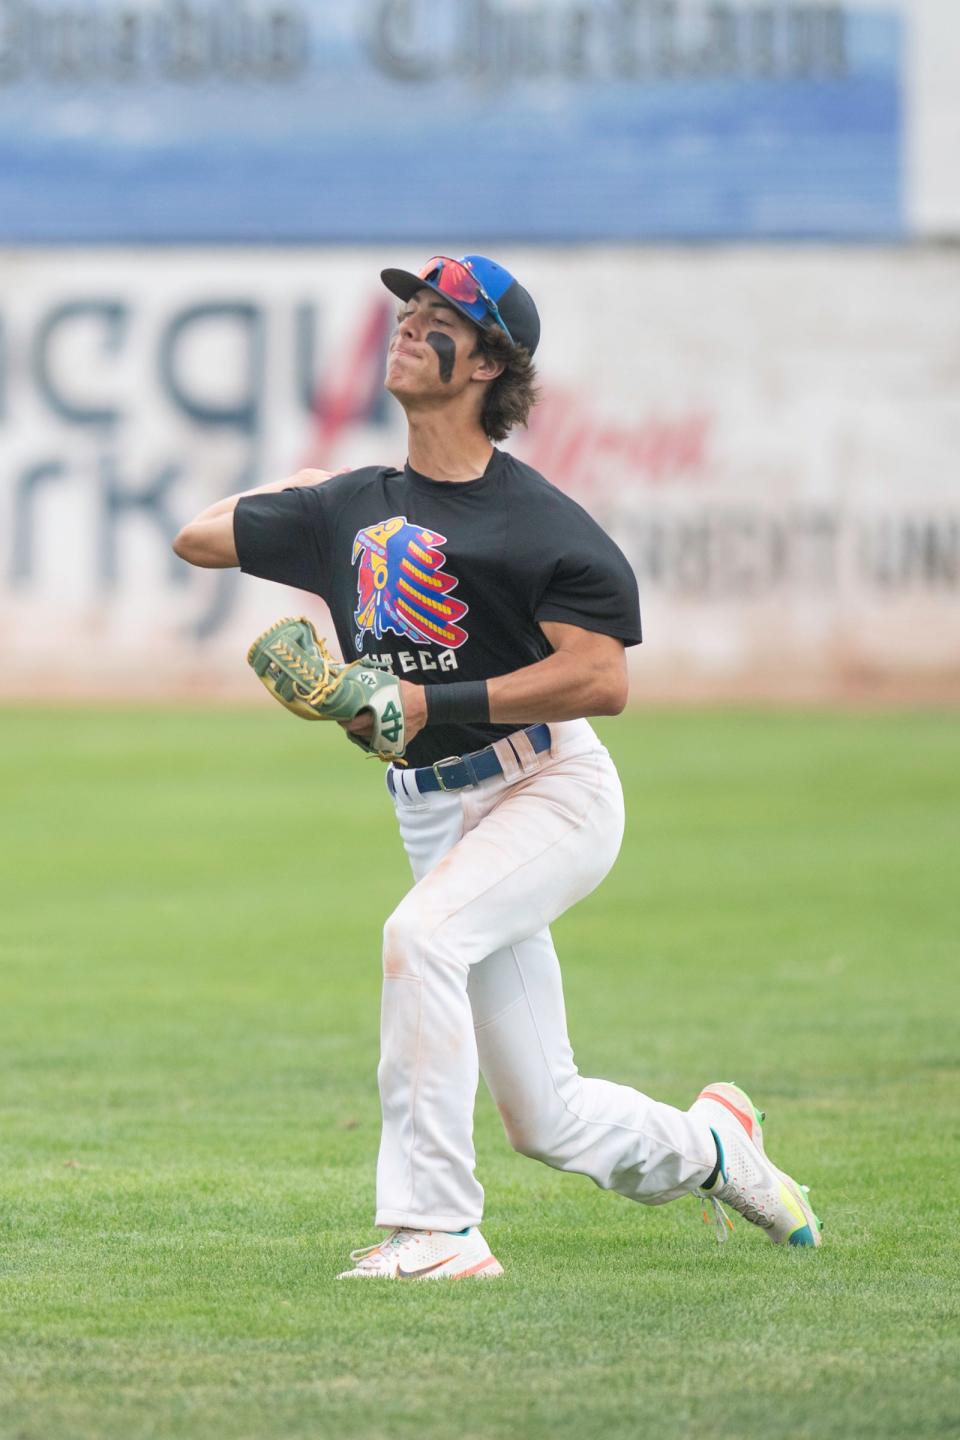 Pueblo Azteca outfielder Joel Gonzales makes a throw from right field during a game against the Woodward Travelers during the 42nd annual Tony Andenucio Memorial Baseball Tournament on Saturday, June 18, 2022, in Pueblo, Colo.